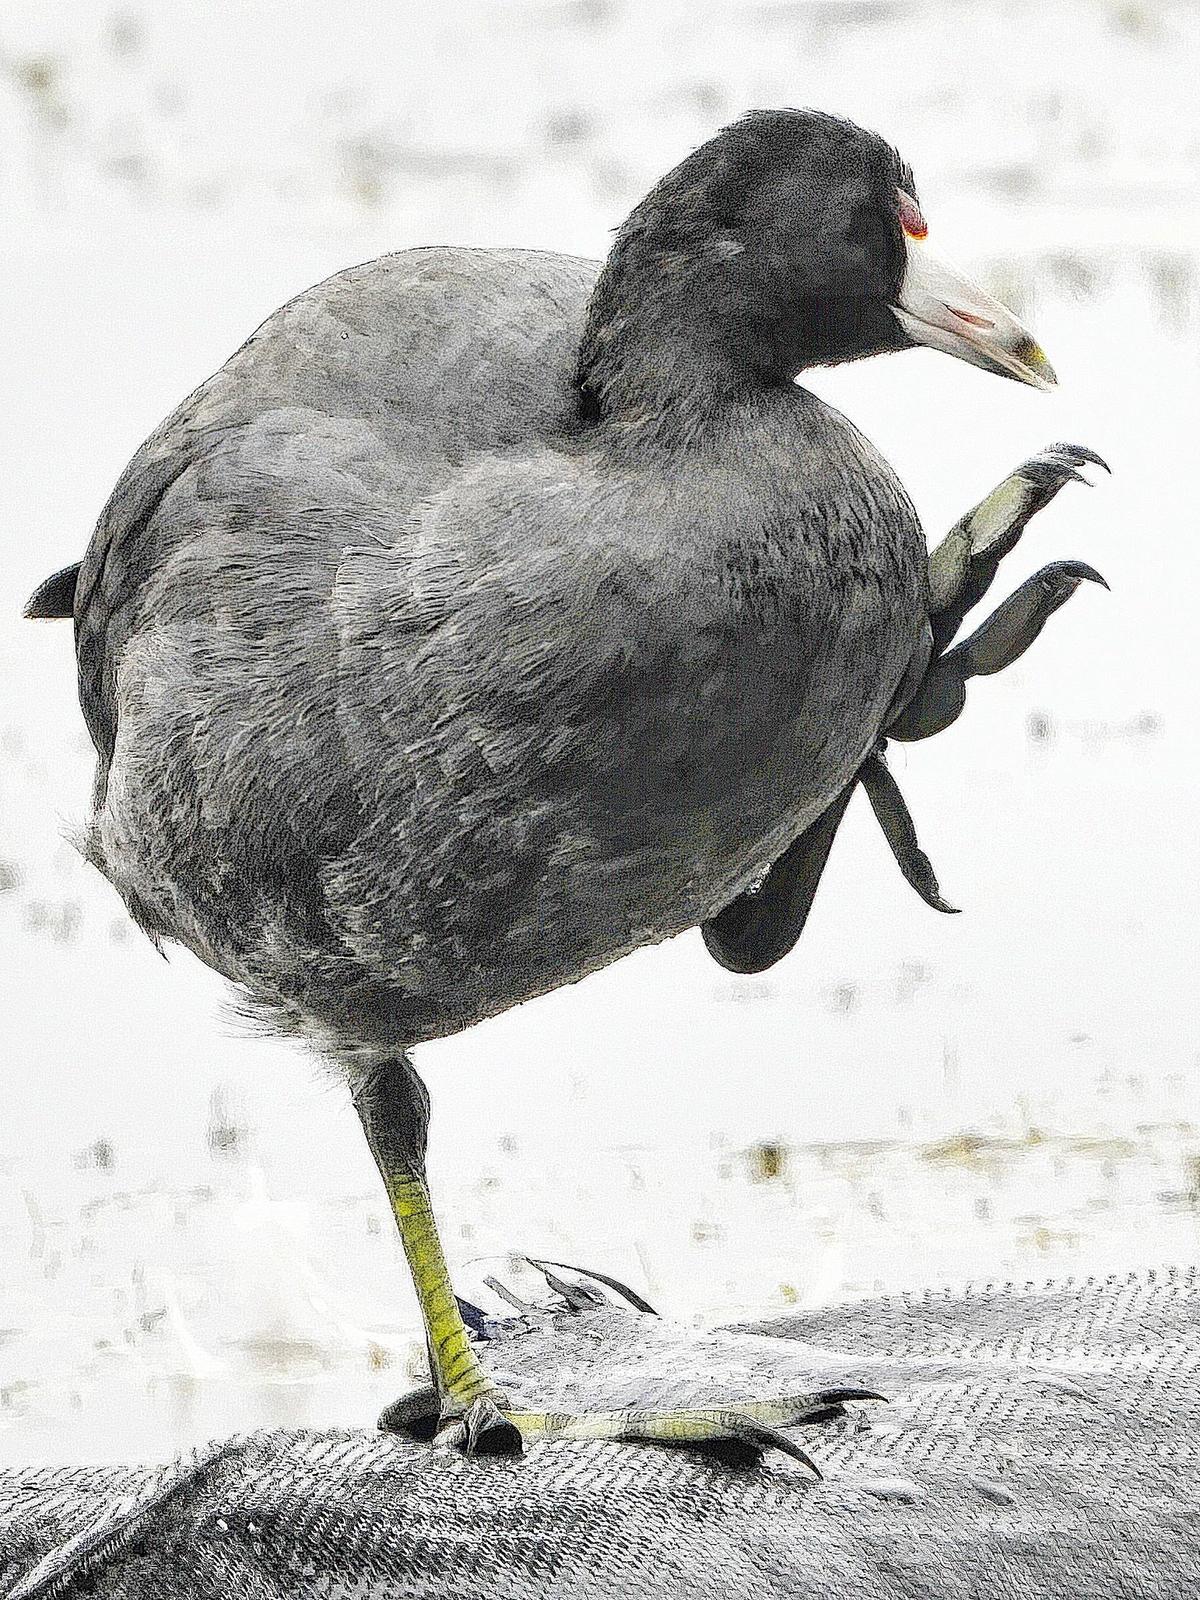 American Coot (Red-shielded) Photo by Dan Tallman